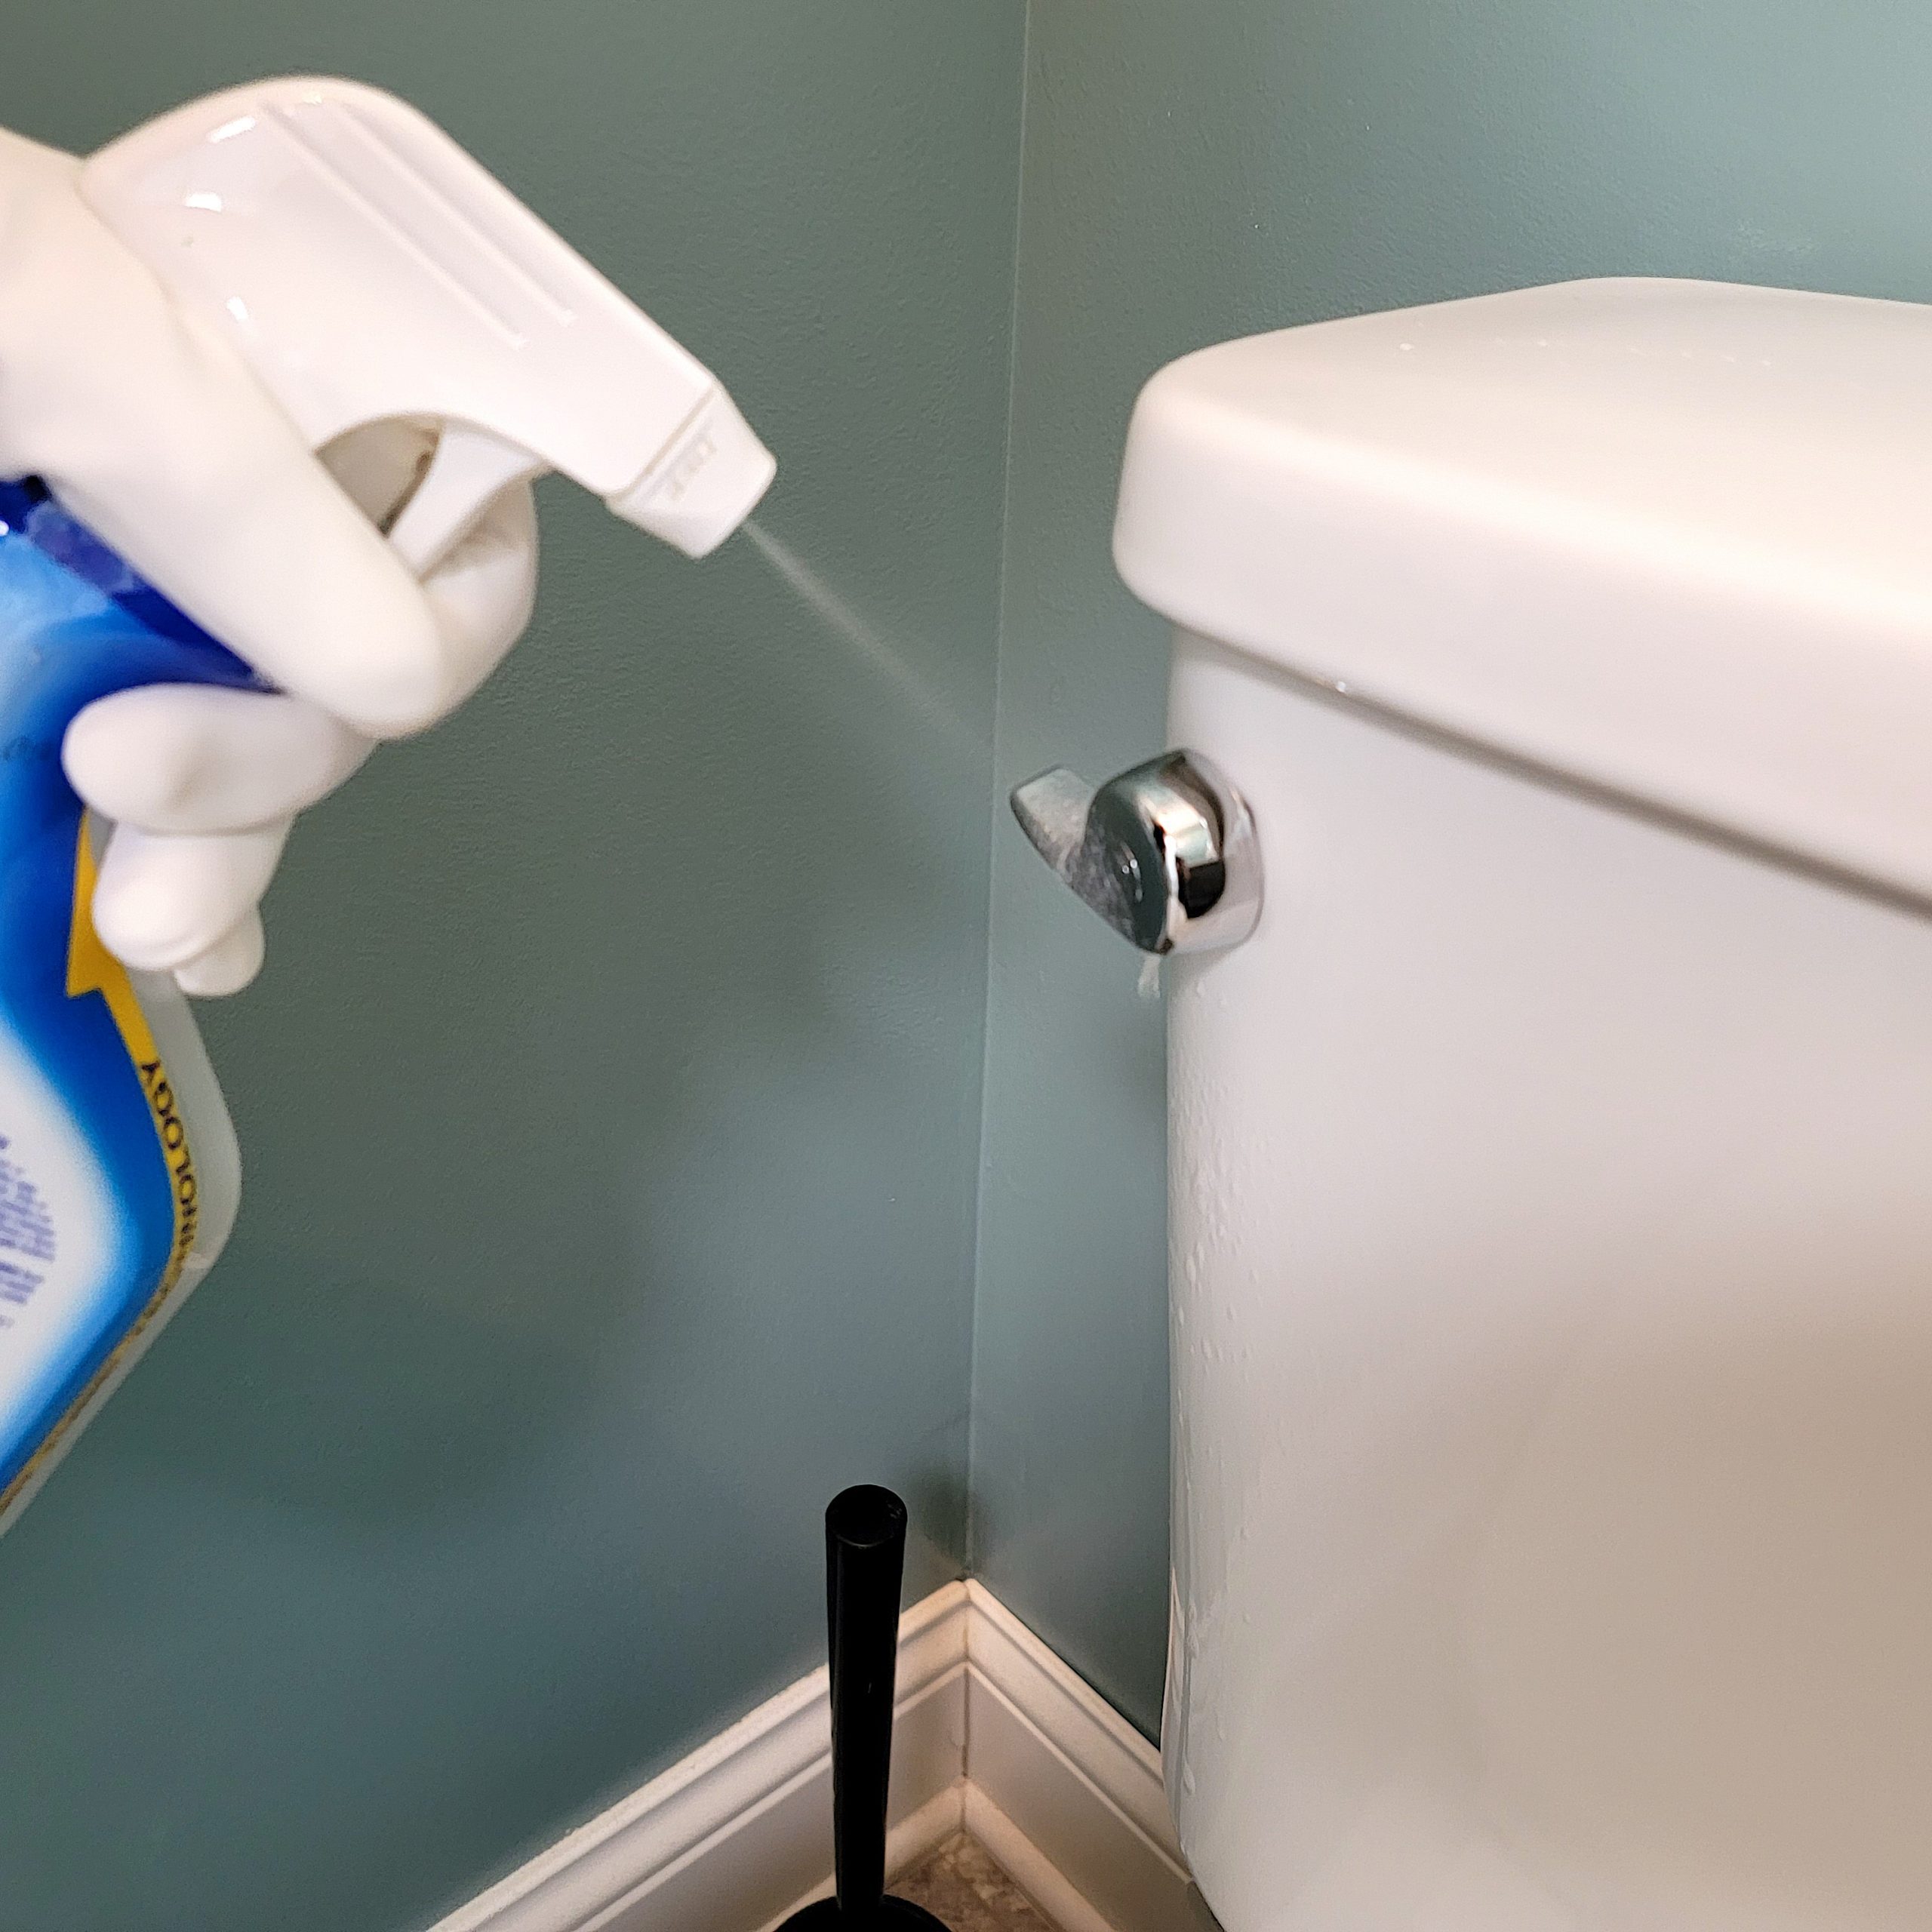 spraying the toilet handle with clorox toilet cleaning spray